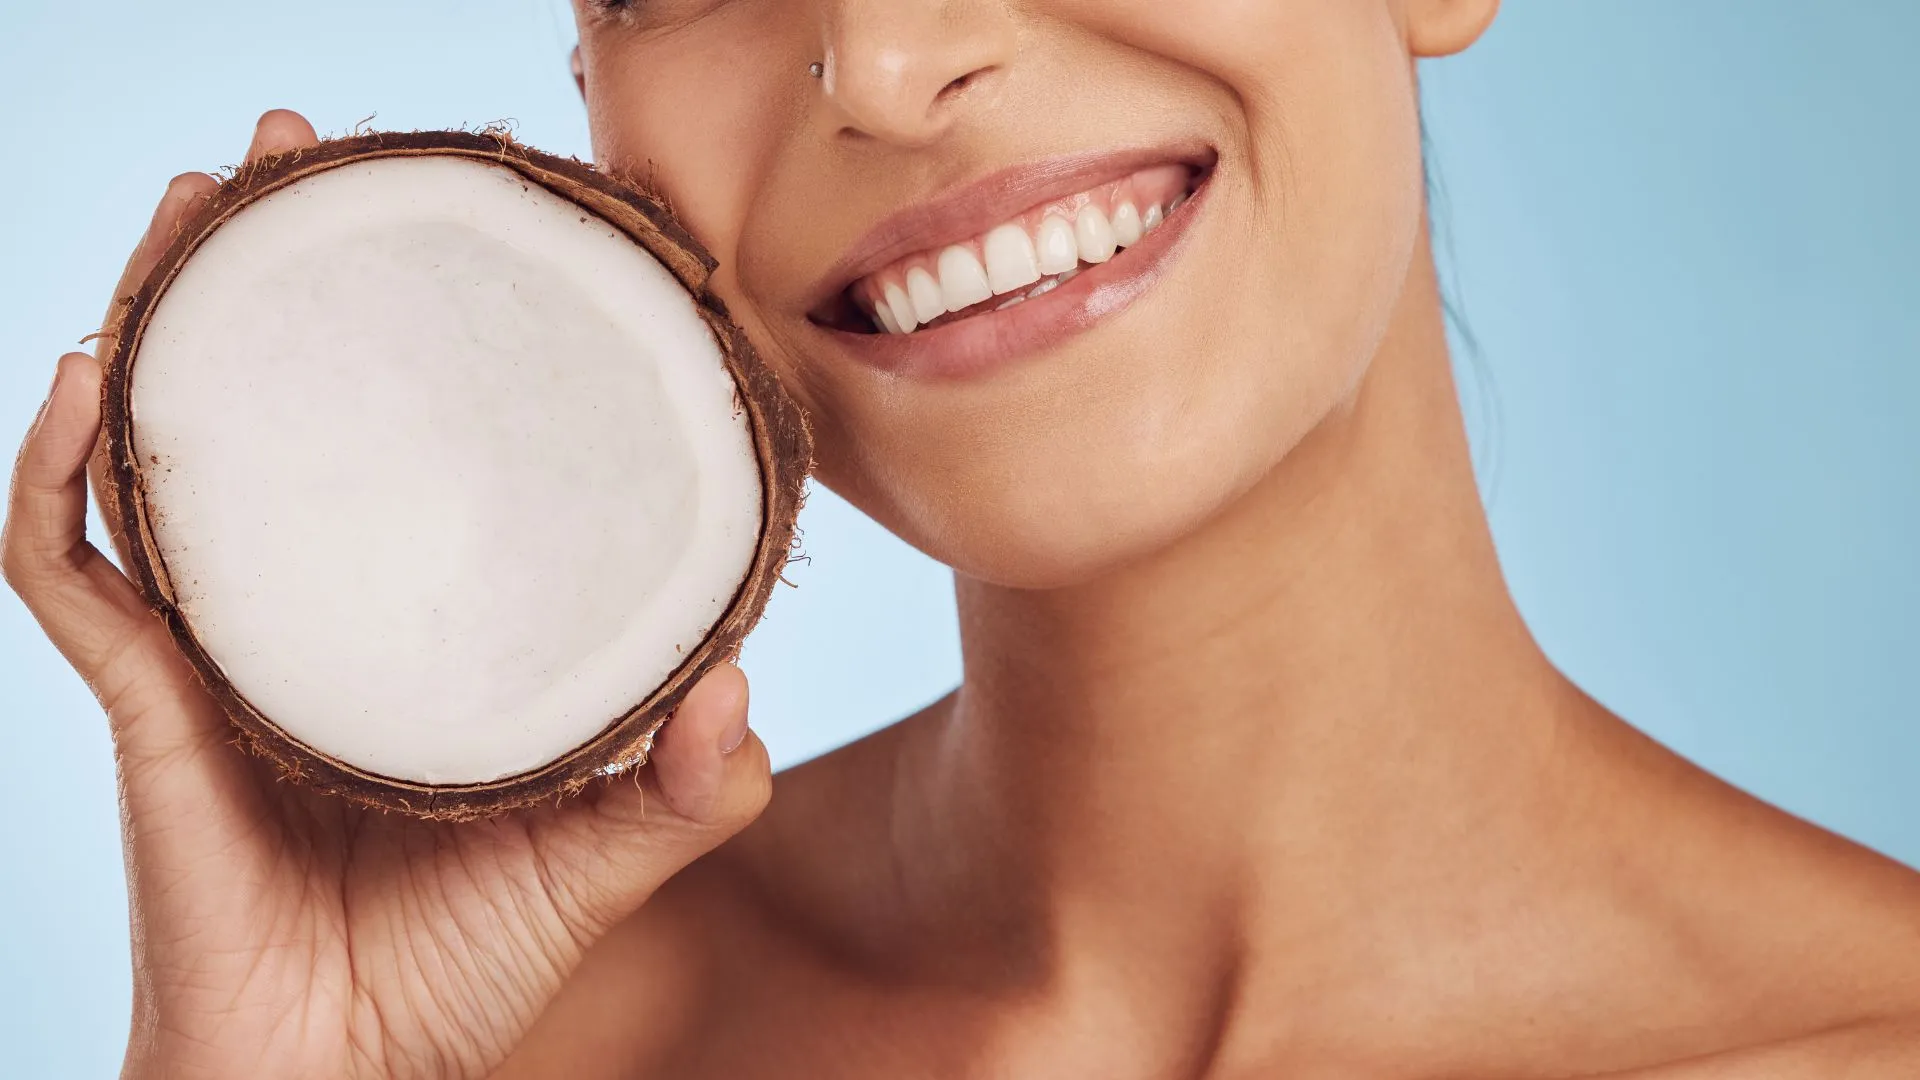 Oil Pulling The Coconut Oil Teeth Whitening Myth